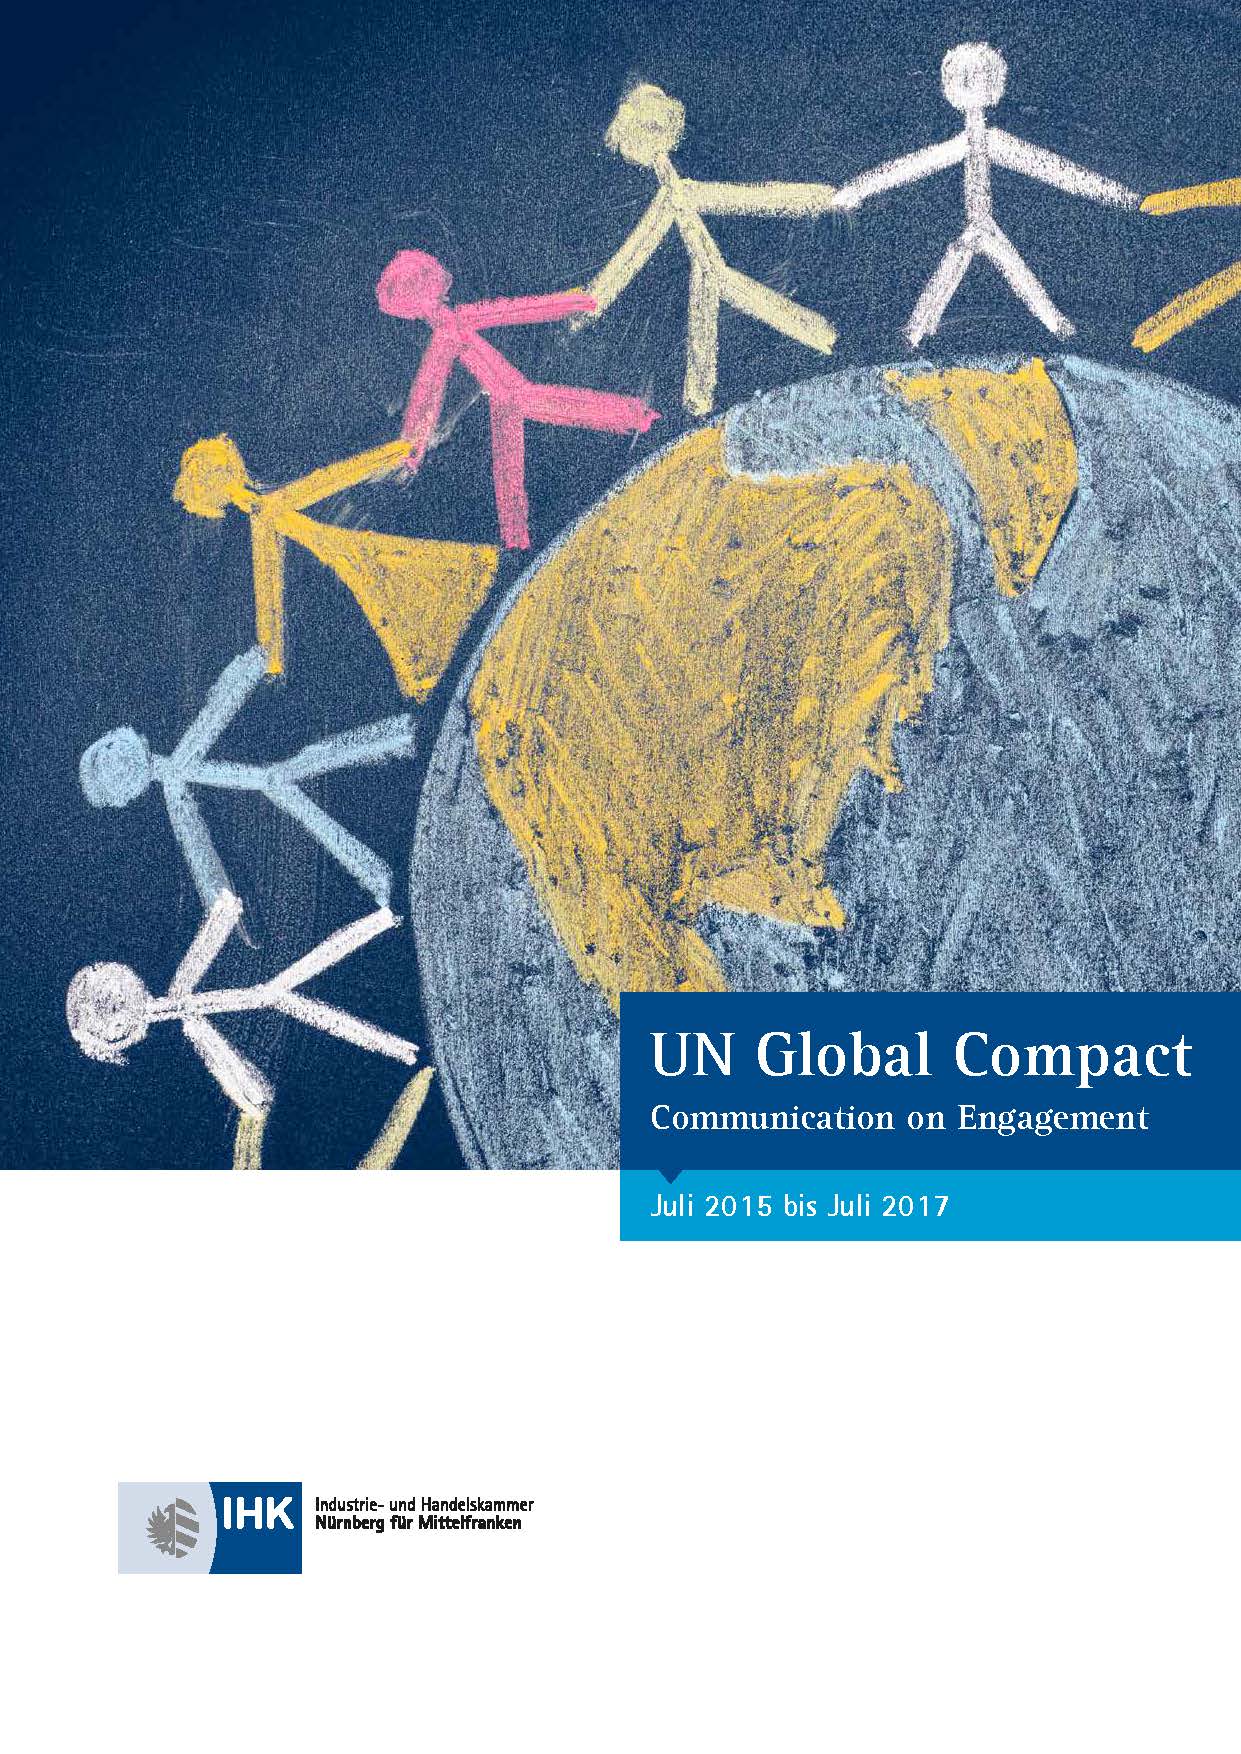 UN Global Compact - Communication on Engagement